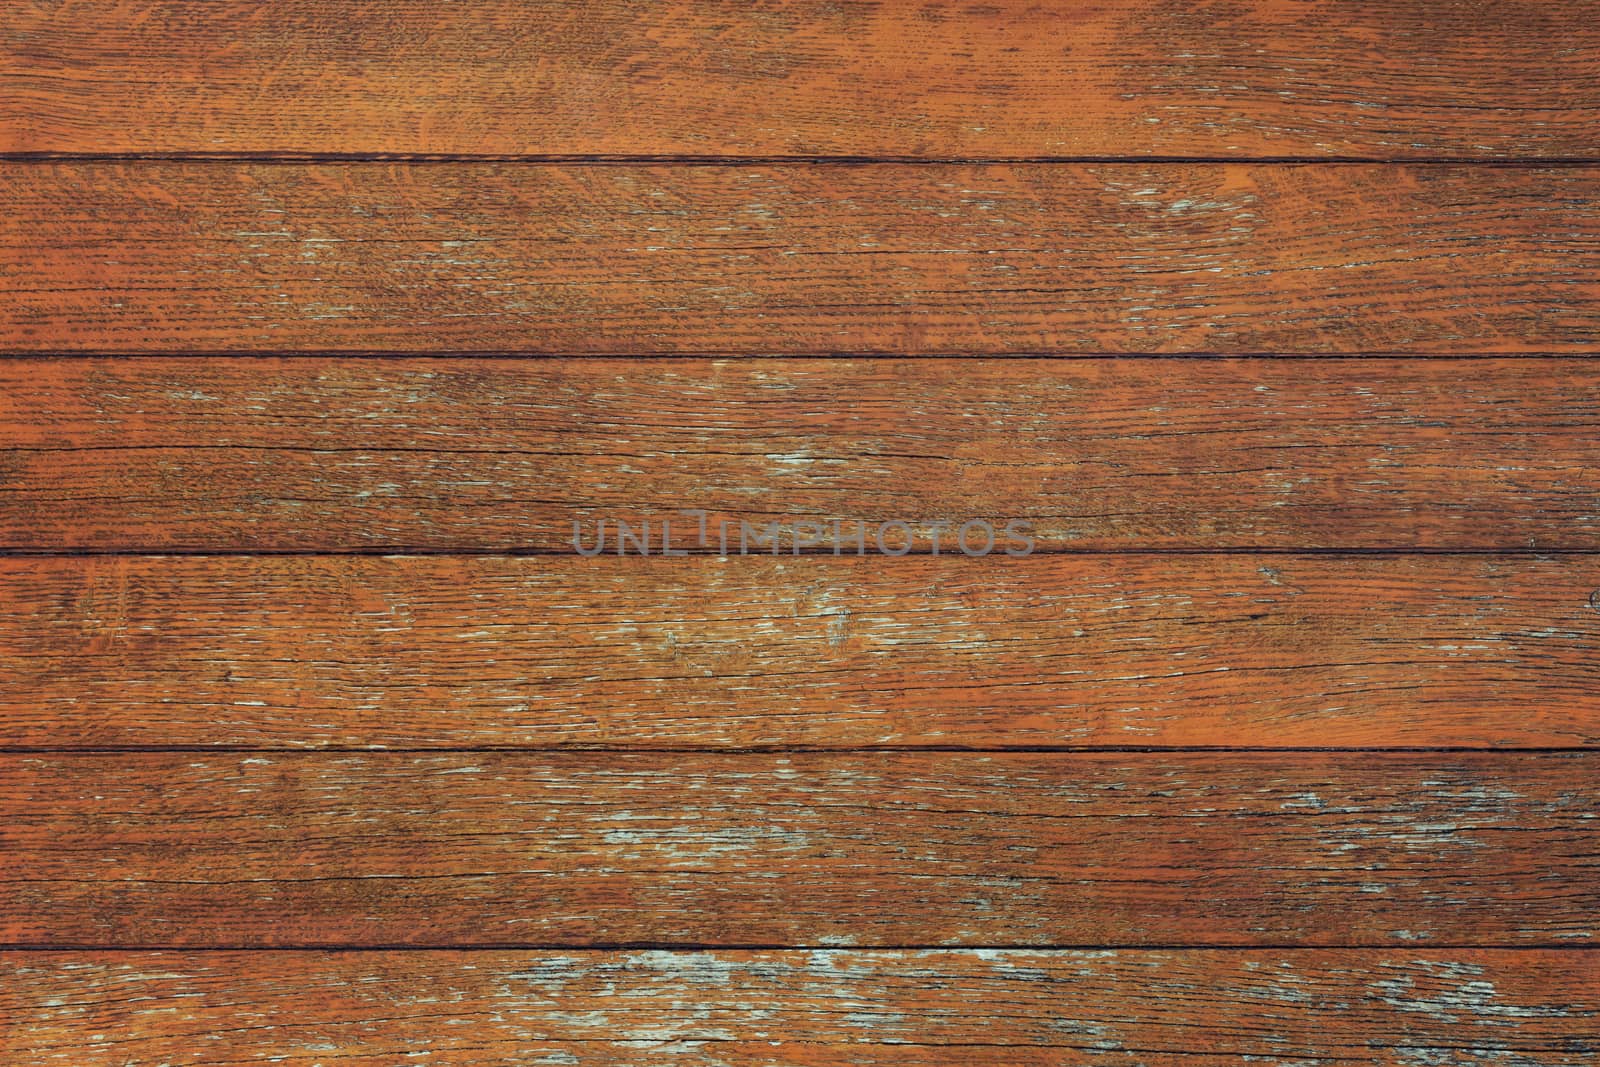 Old vintage wood texture background by wdnet_studio